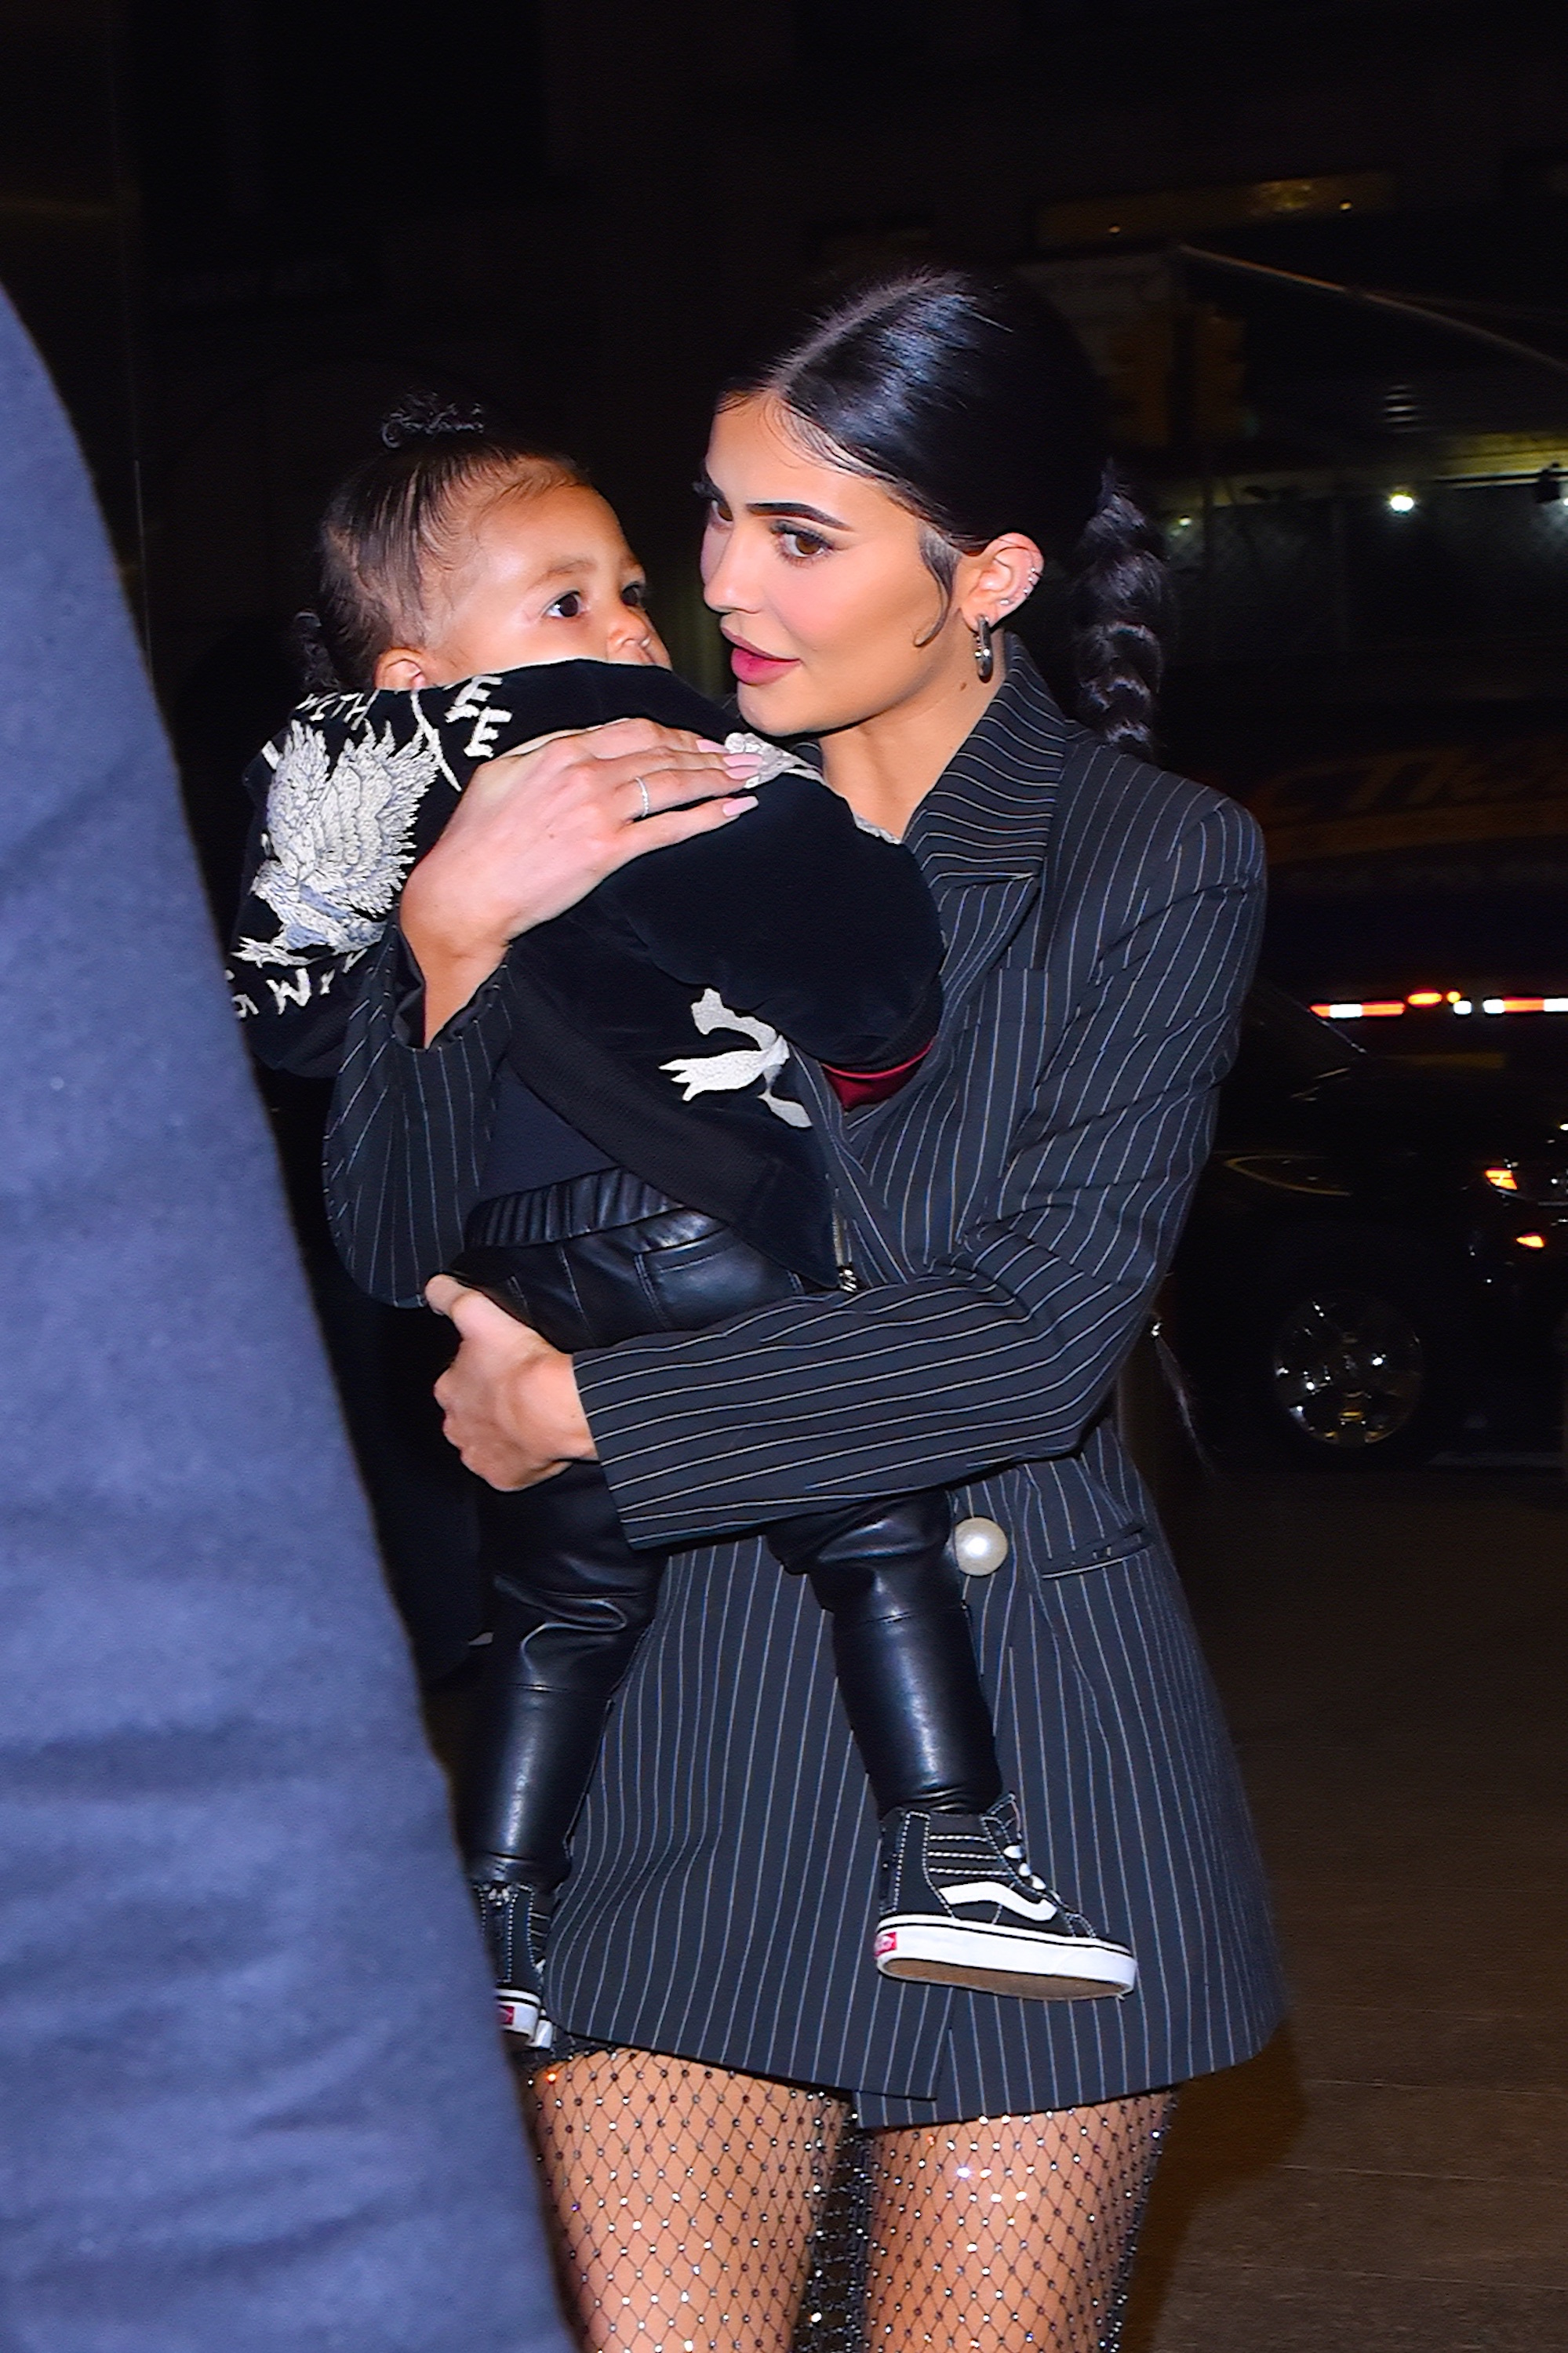 Kylie Jenner and her daughter Stormi Webster spotted in Manhattan on May 3, 2019, in New York City. | Source: Getty Images